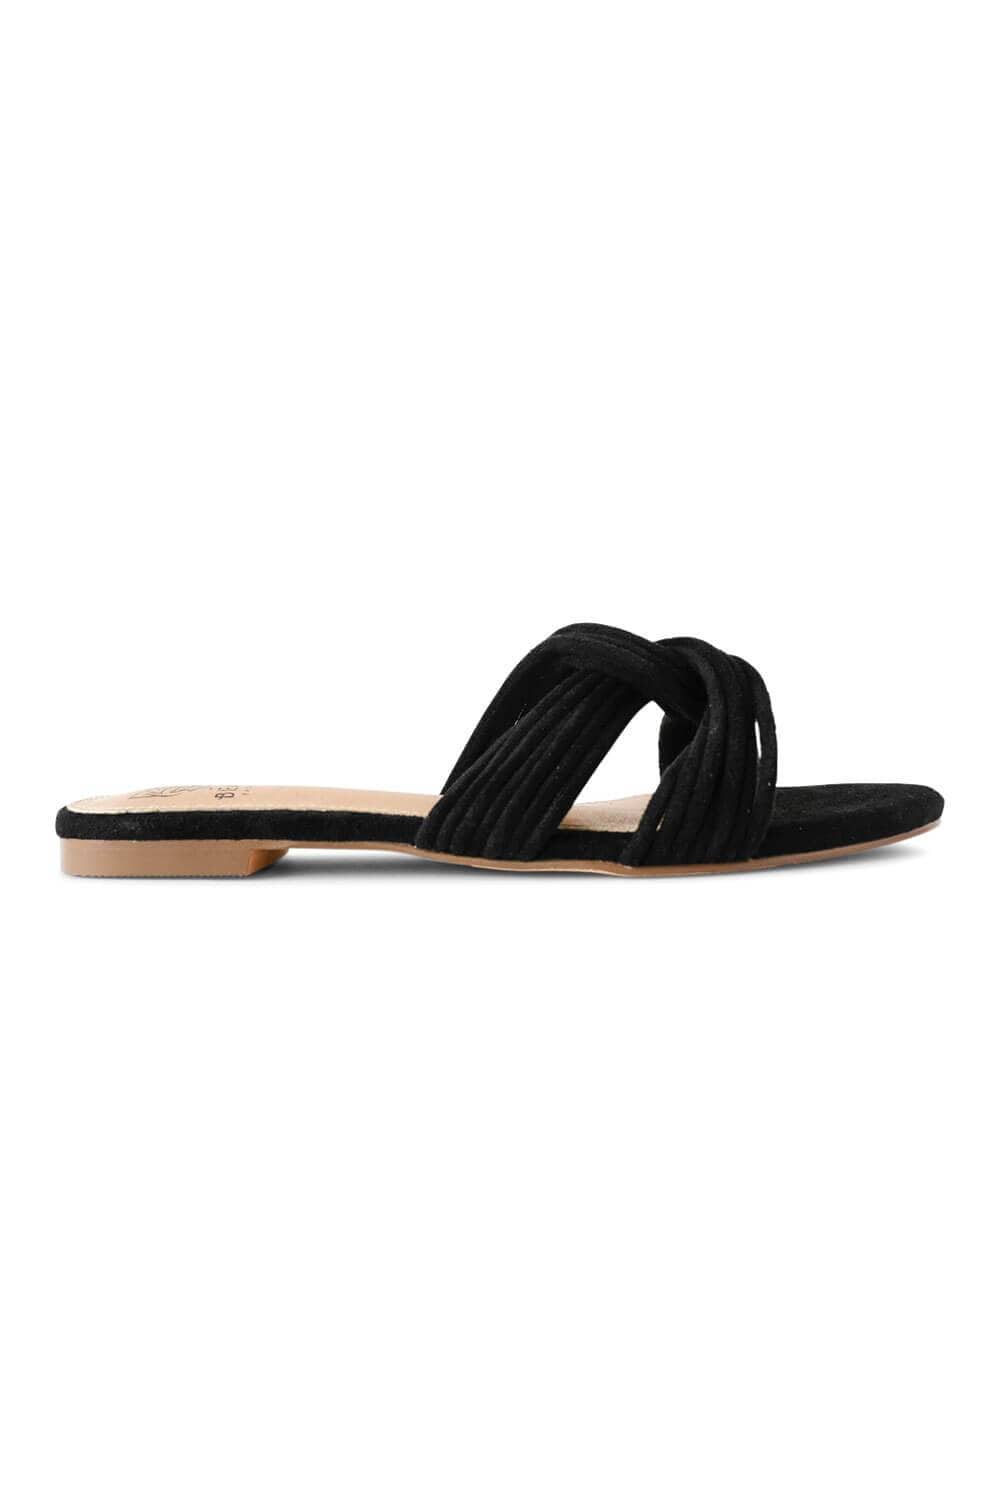 Fashion summer new flat sandals Roman style Korean shoes SH13 (EU 37,  Black): Buy Online at Best Price in UAE - Amazon.ae